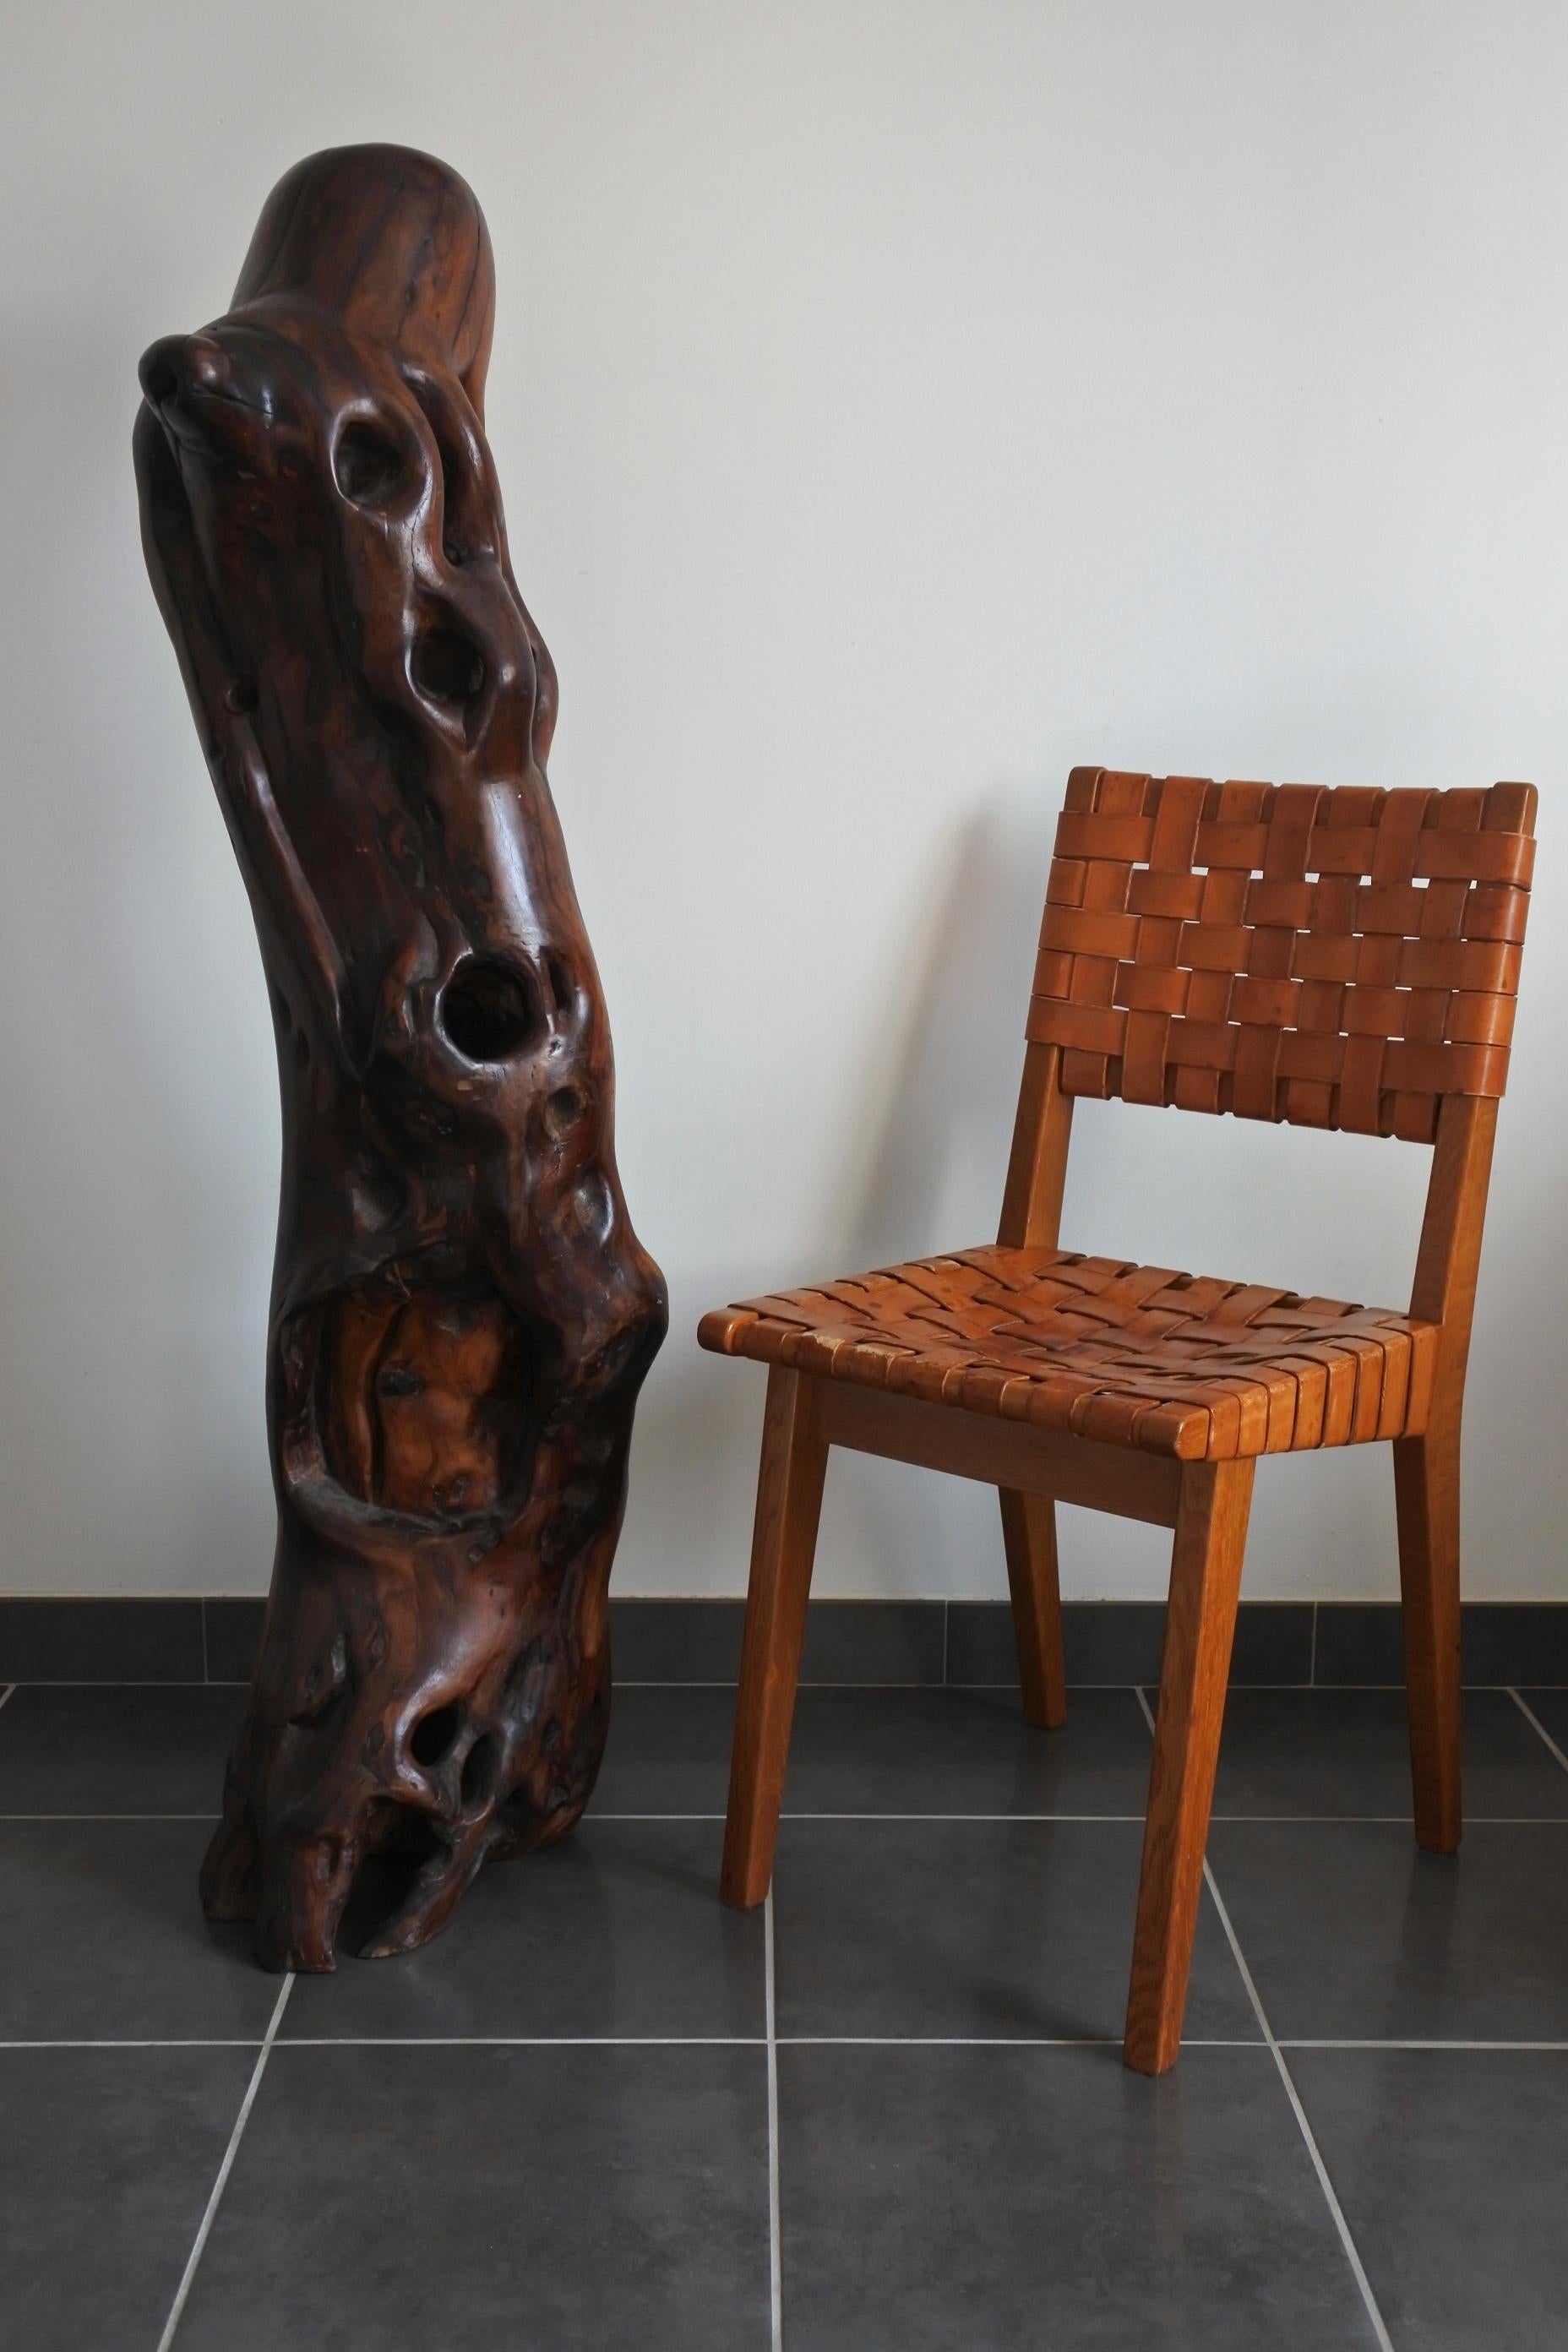 Extra large Mid-Century Modern organic sculpture.
Made in France in the 1960s.
hand carved from an olive wood trunk.
Outstanding grain and details.